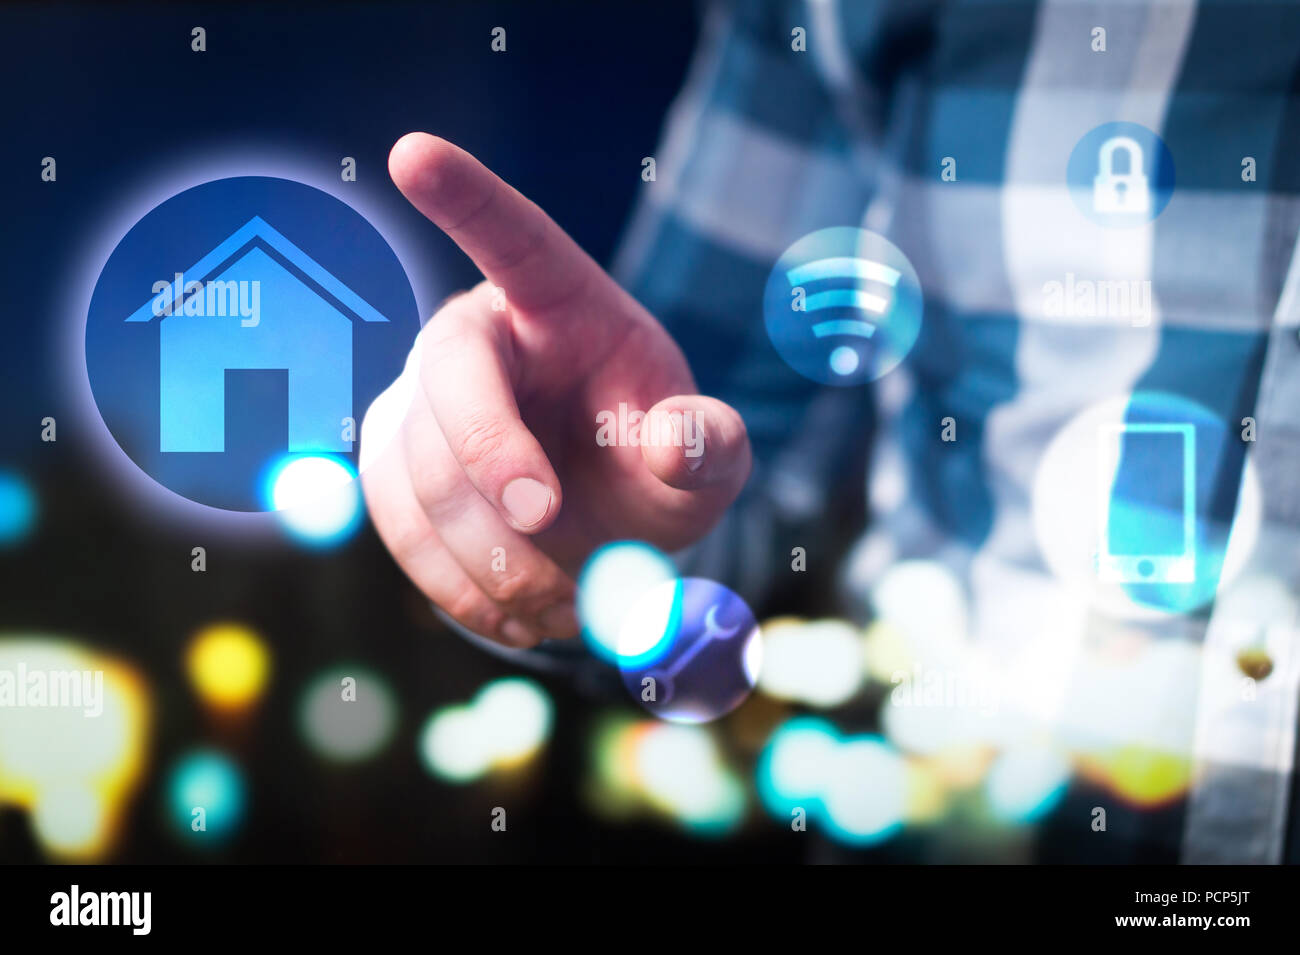 Smart home and internet of things (IOT) concept. Man using modern house security, connection and control system. Abstract interface. Stock Photo